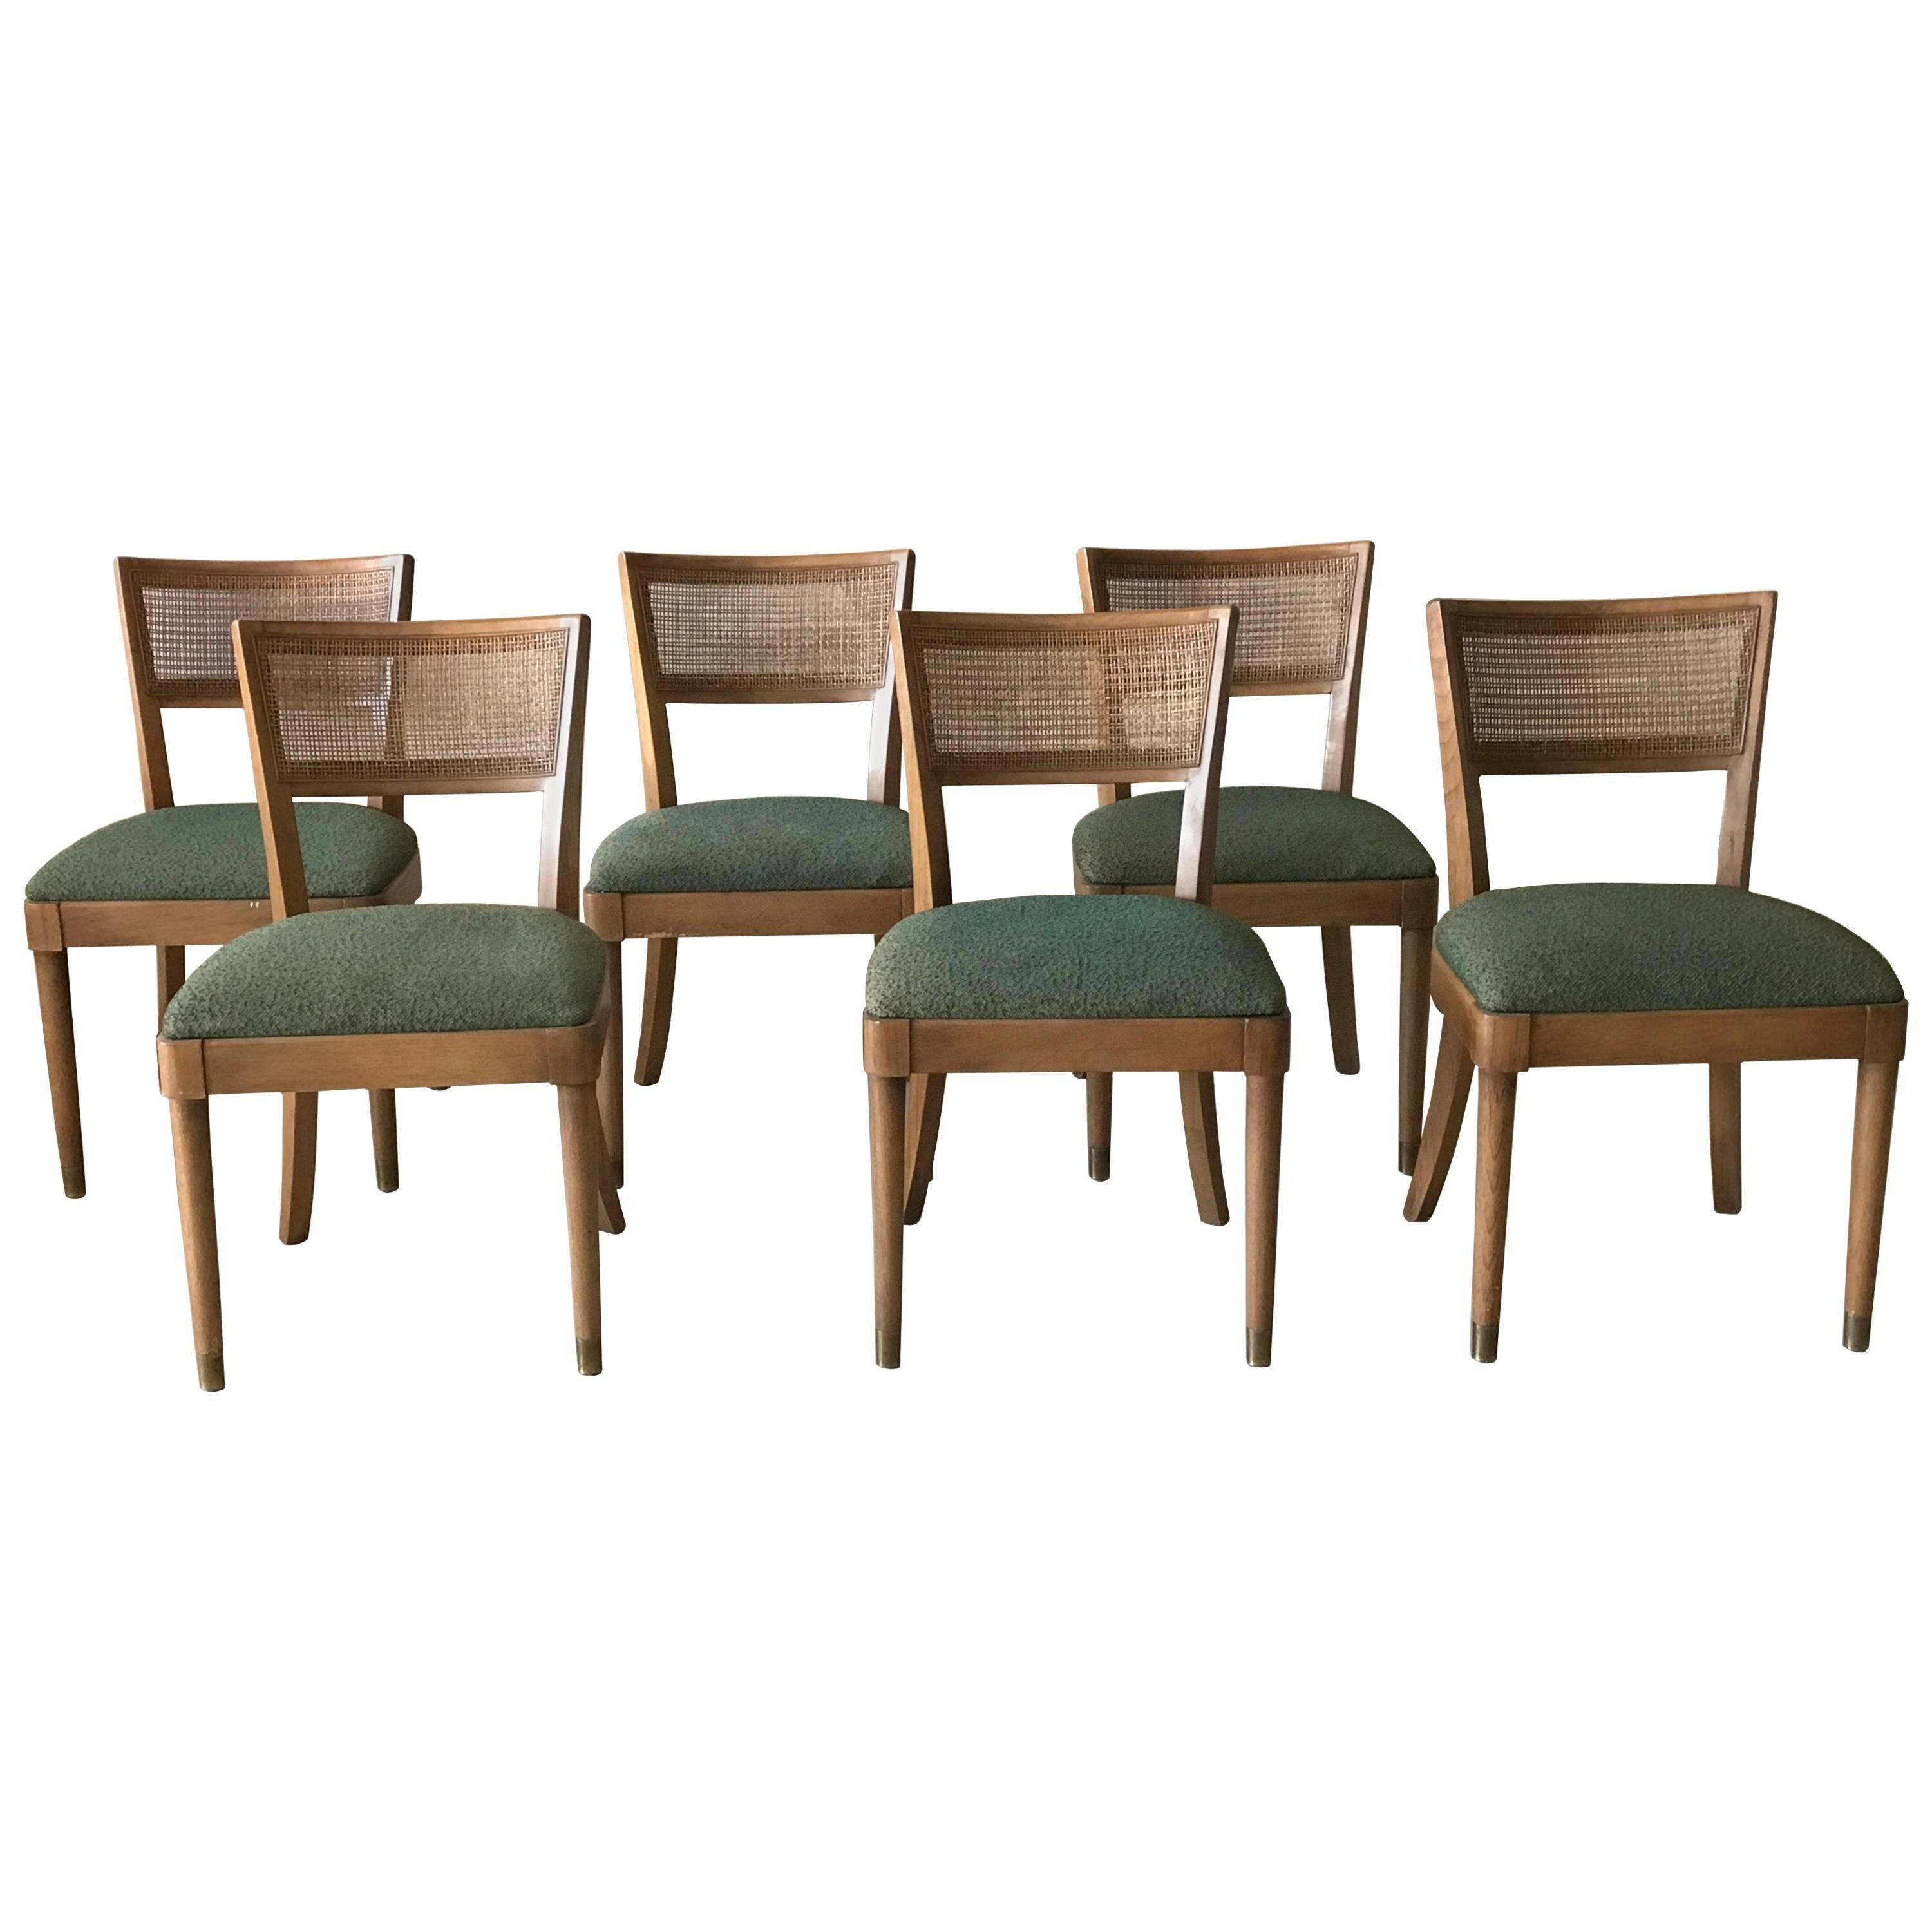 1960s Drexel Walnut Dining Chairs with Cane Backing and Green Fabric, Set of Six